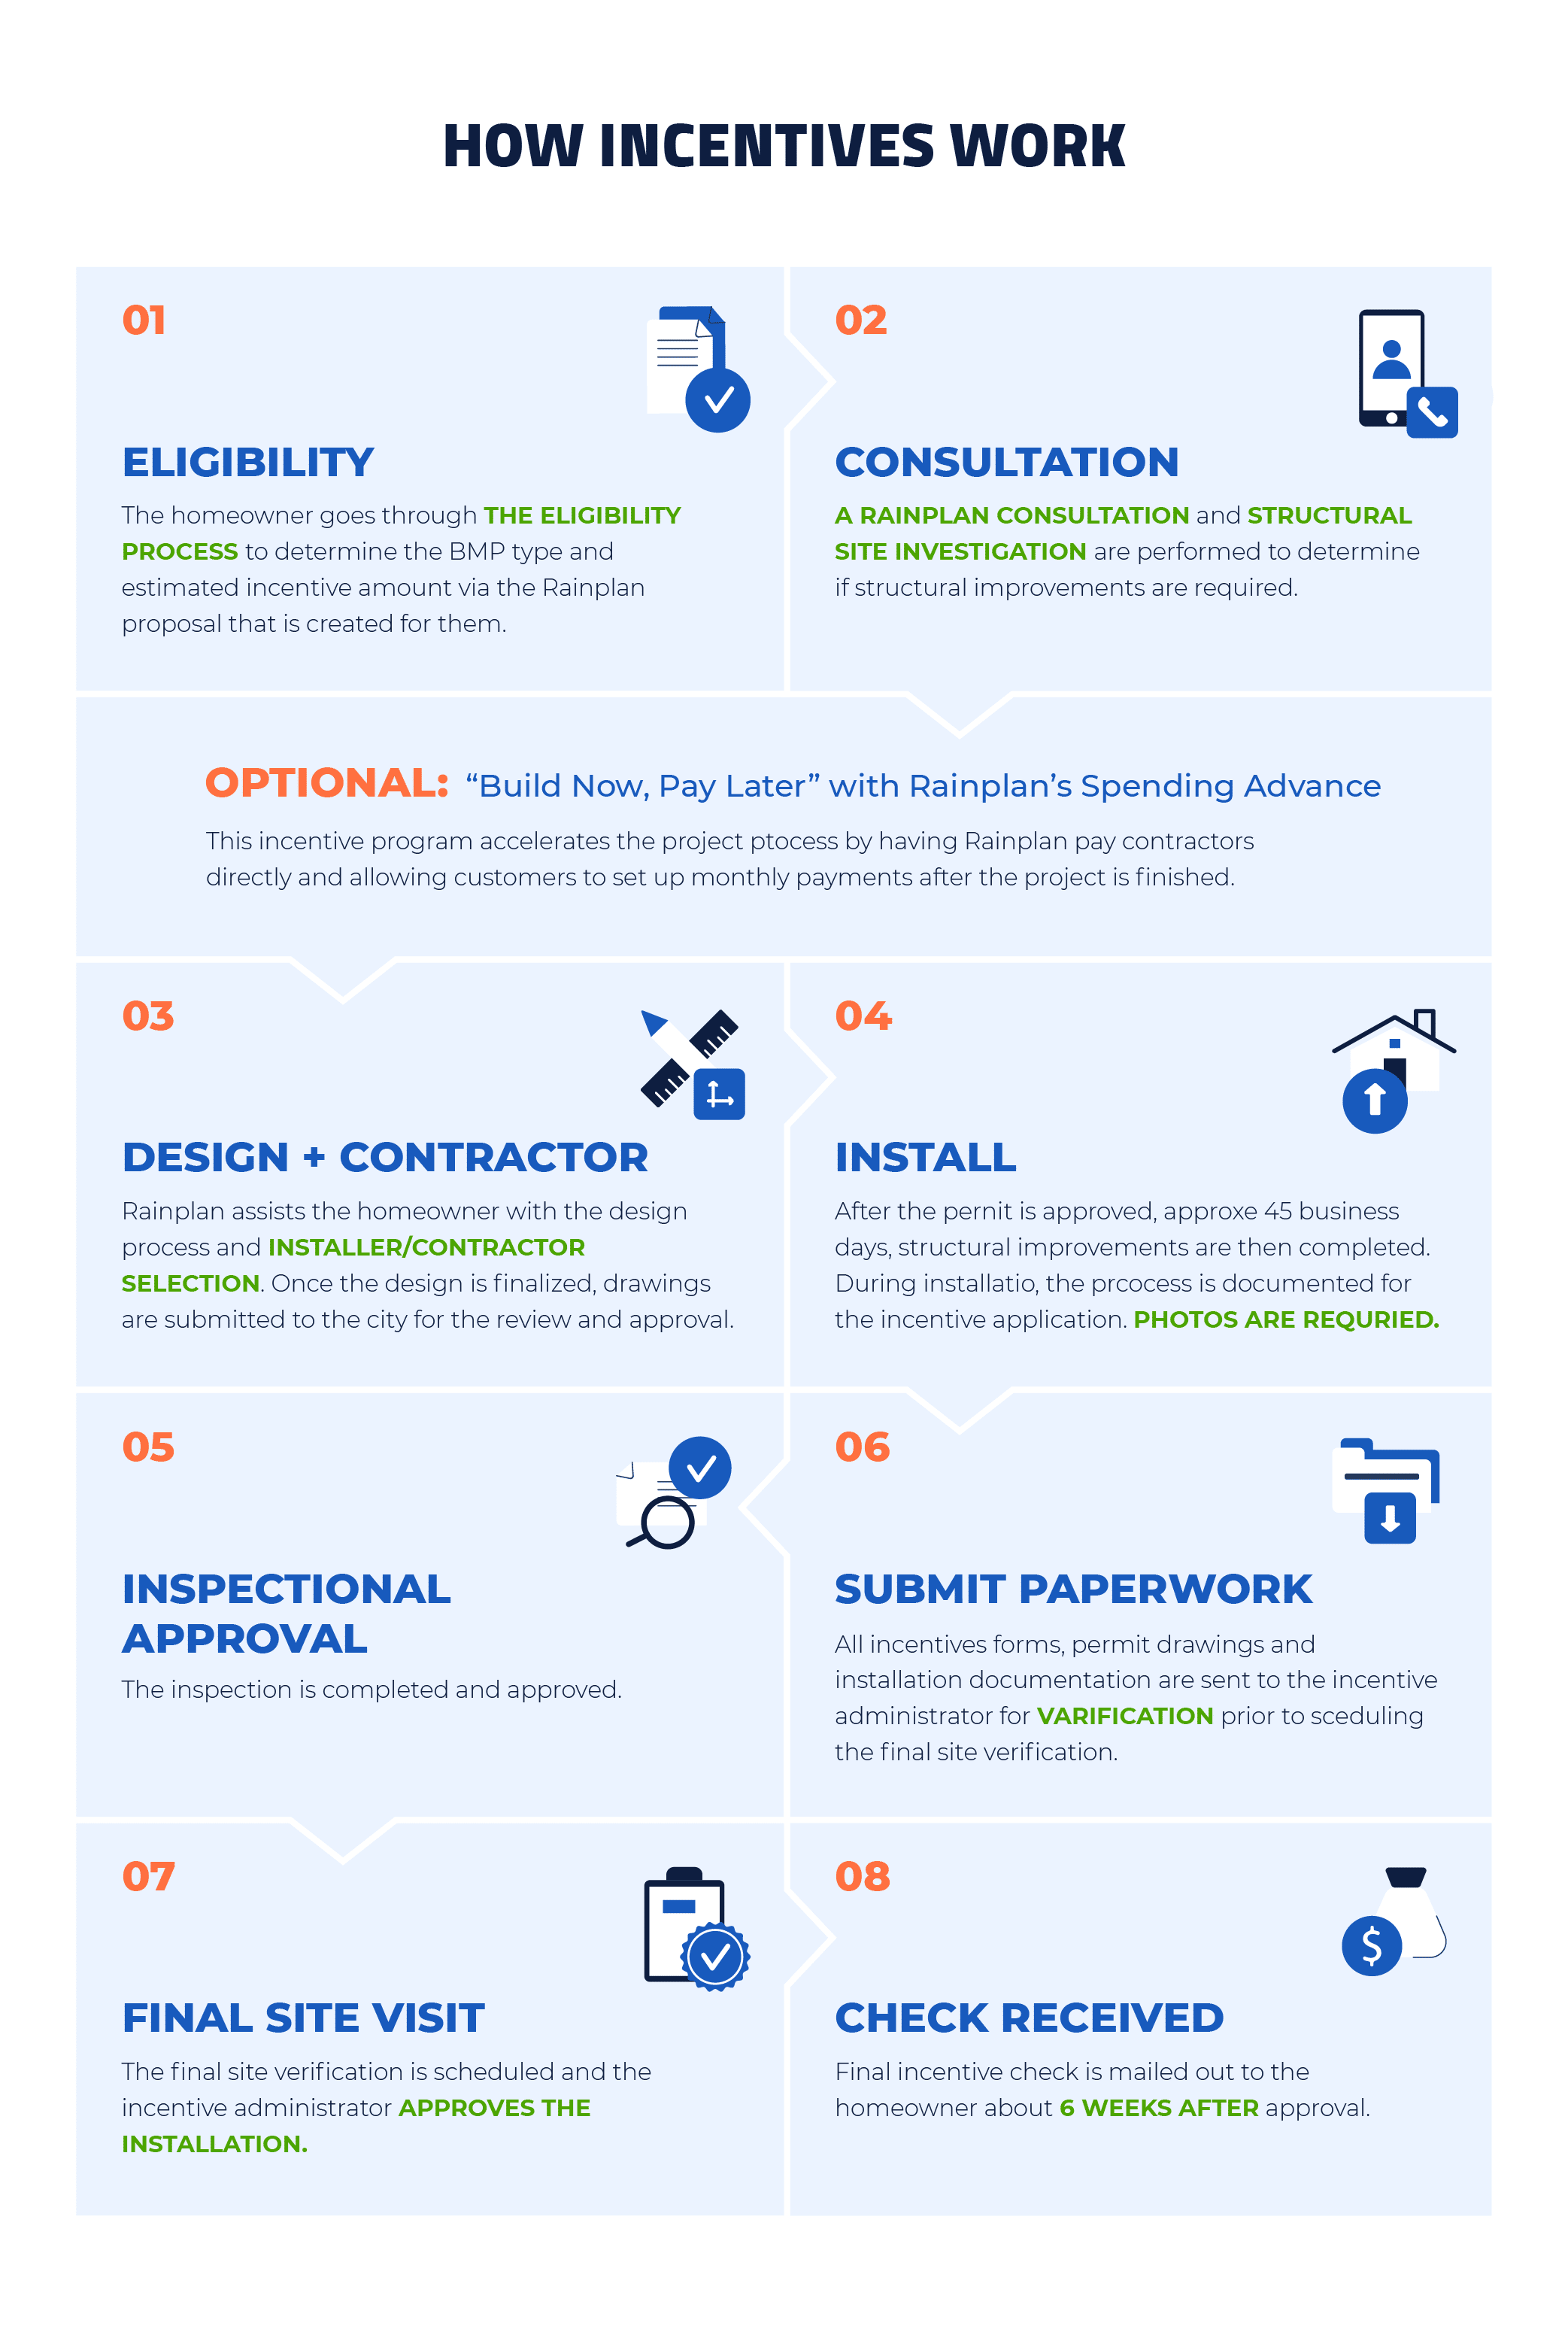 how incentives work infographic